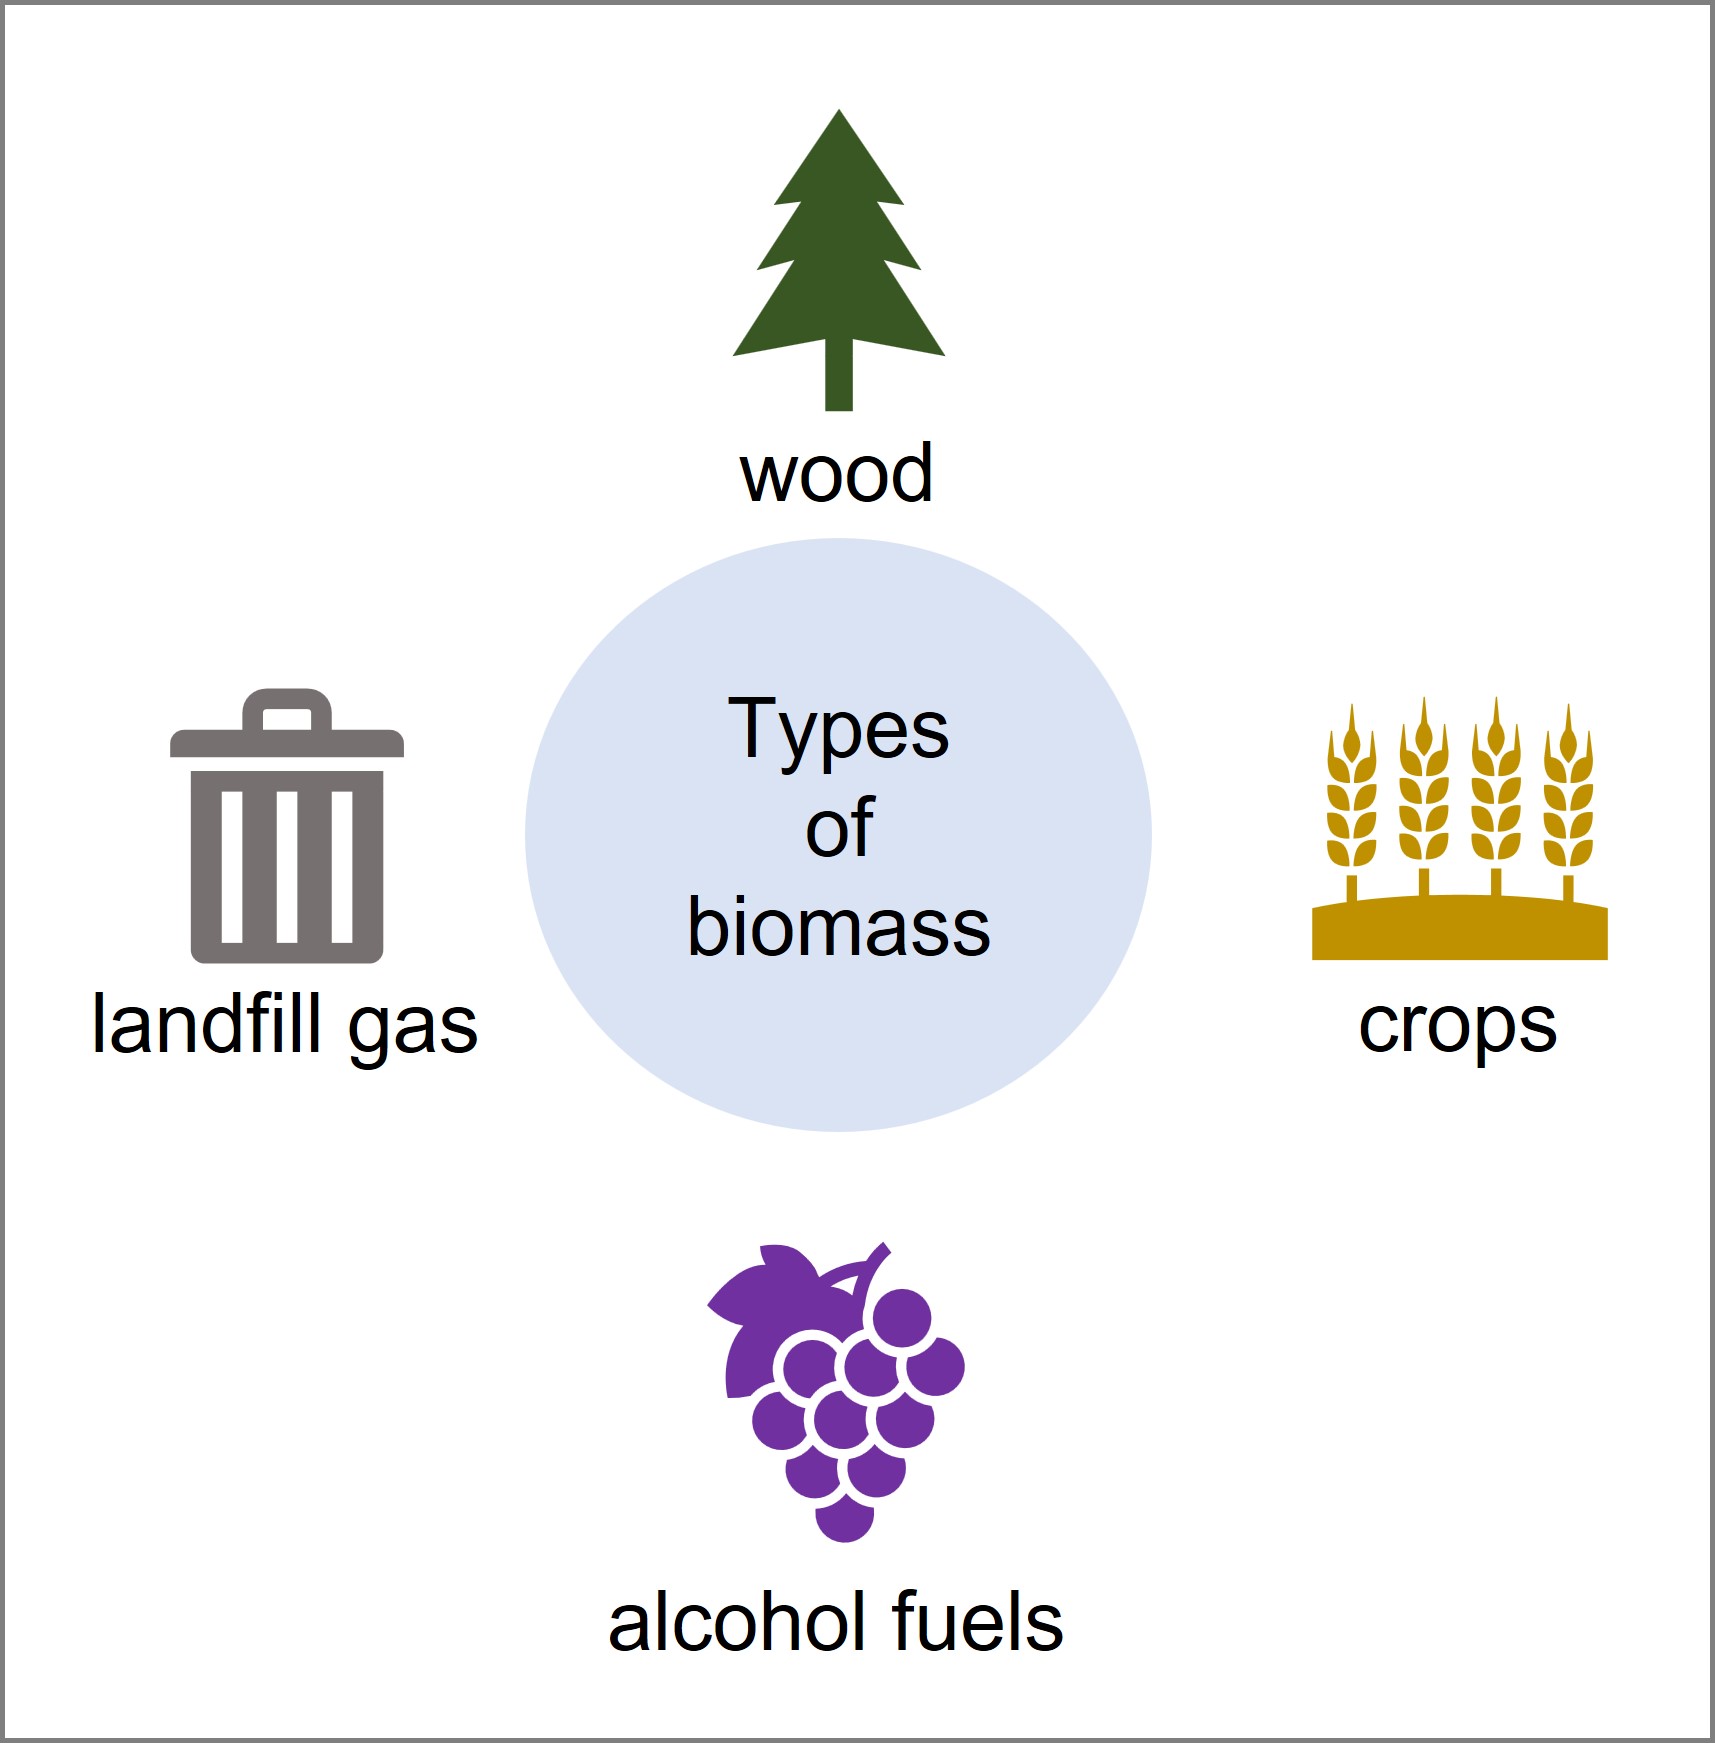 Diagram showing different types of biomass: wood, crops, alcohol, and landfill gas.